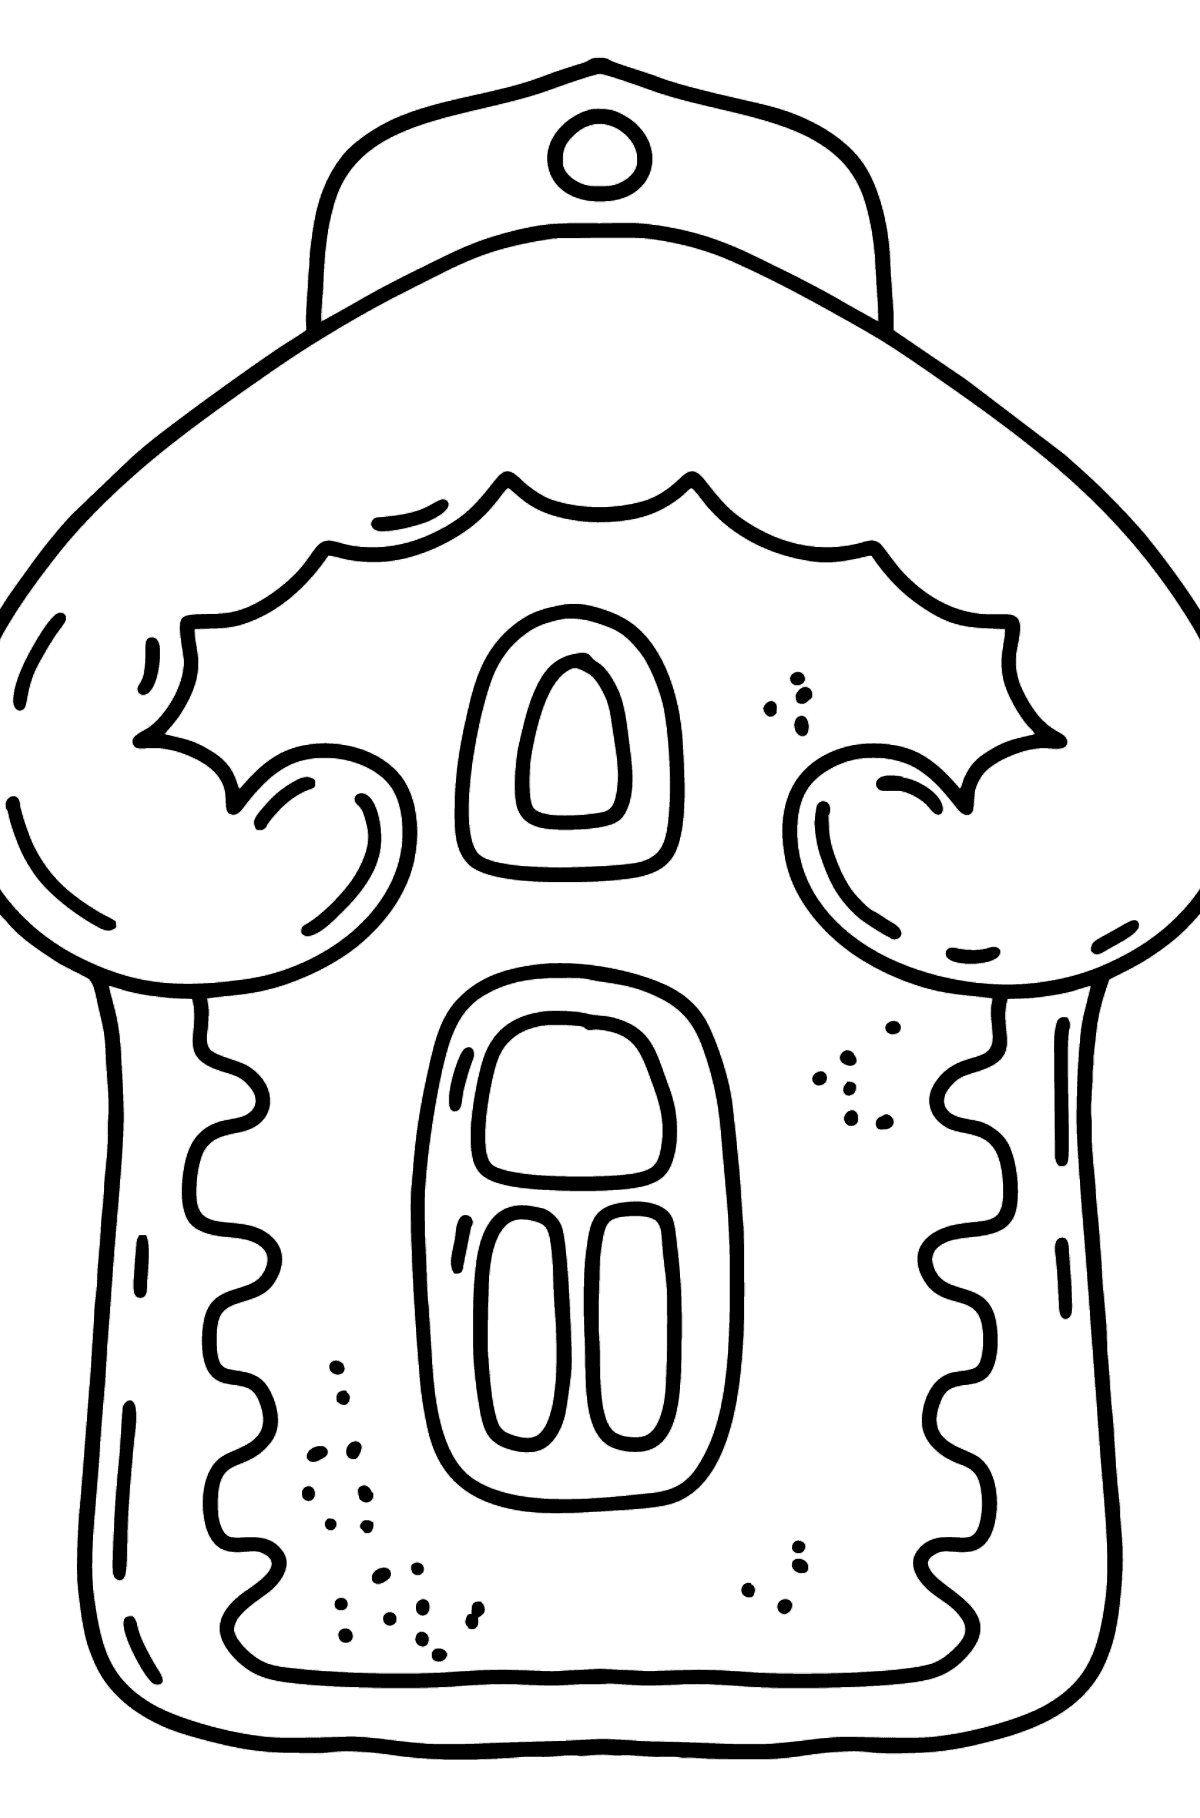 Coloring page - gingerbread house decoration - Coloring Pages for Kids